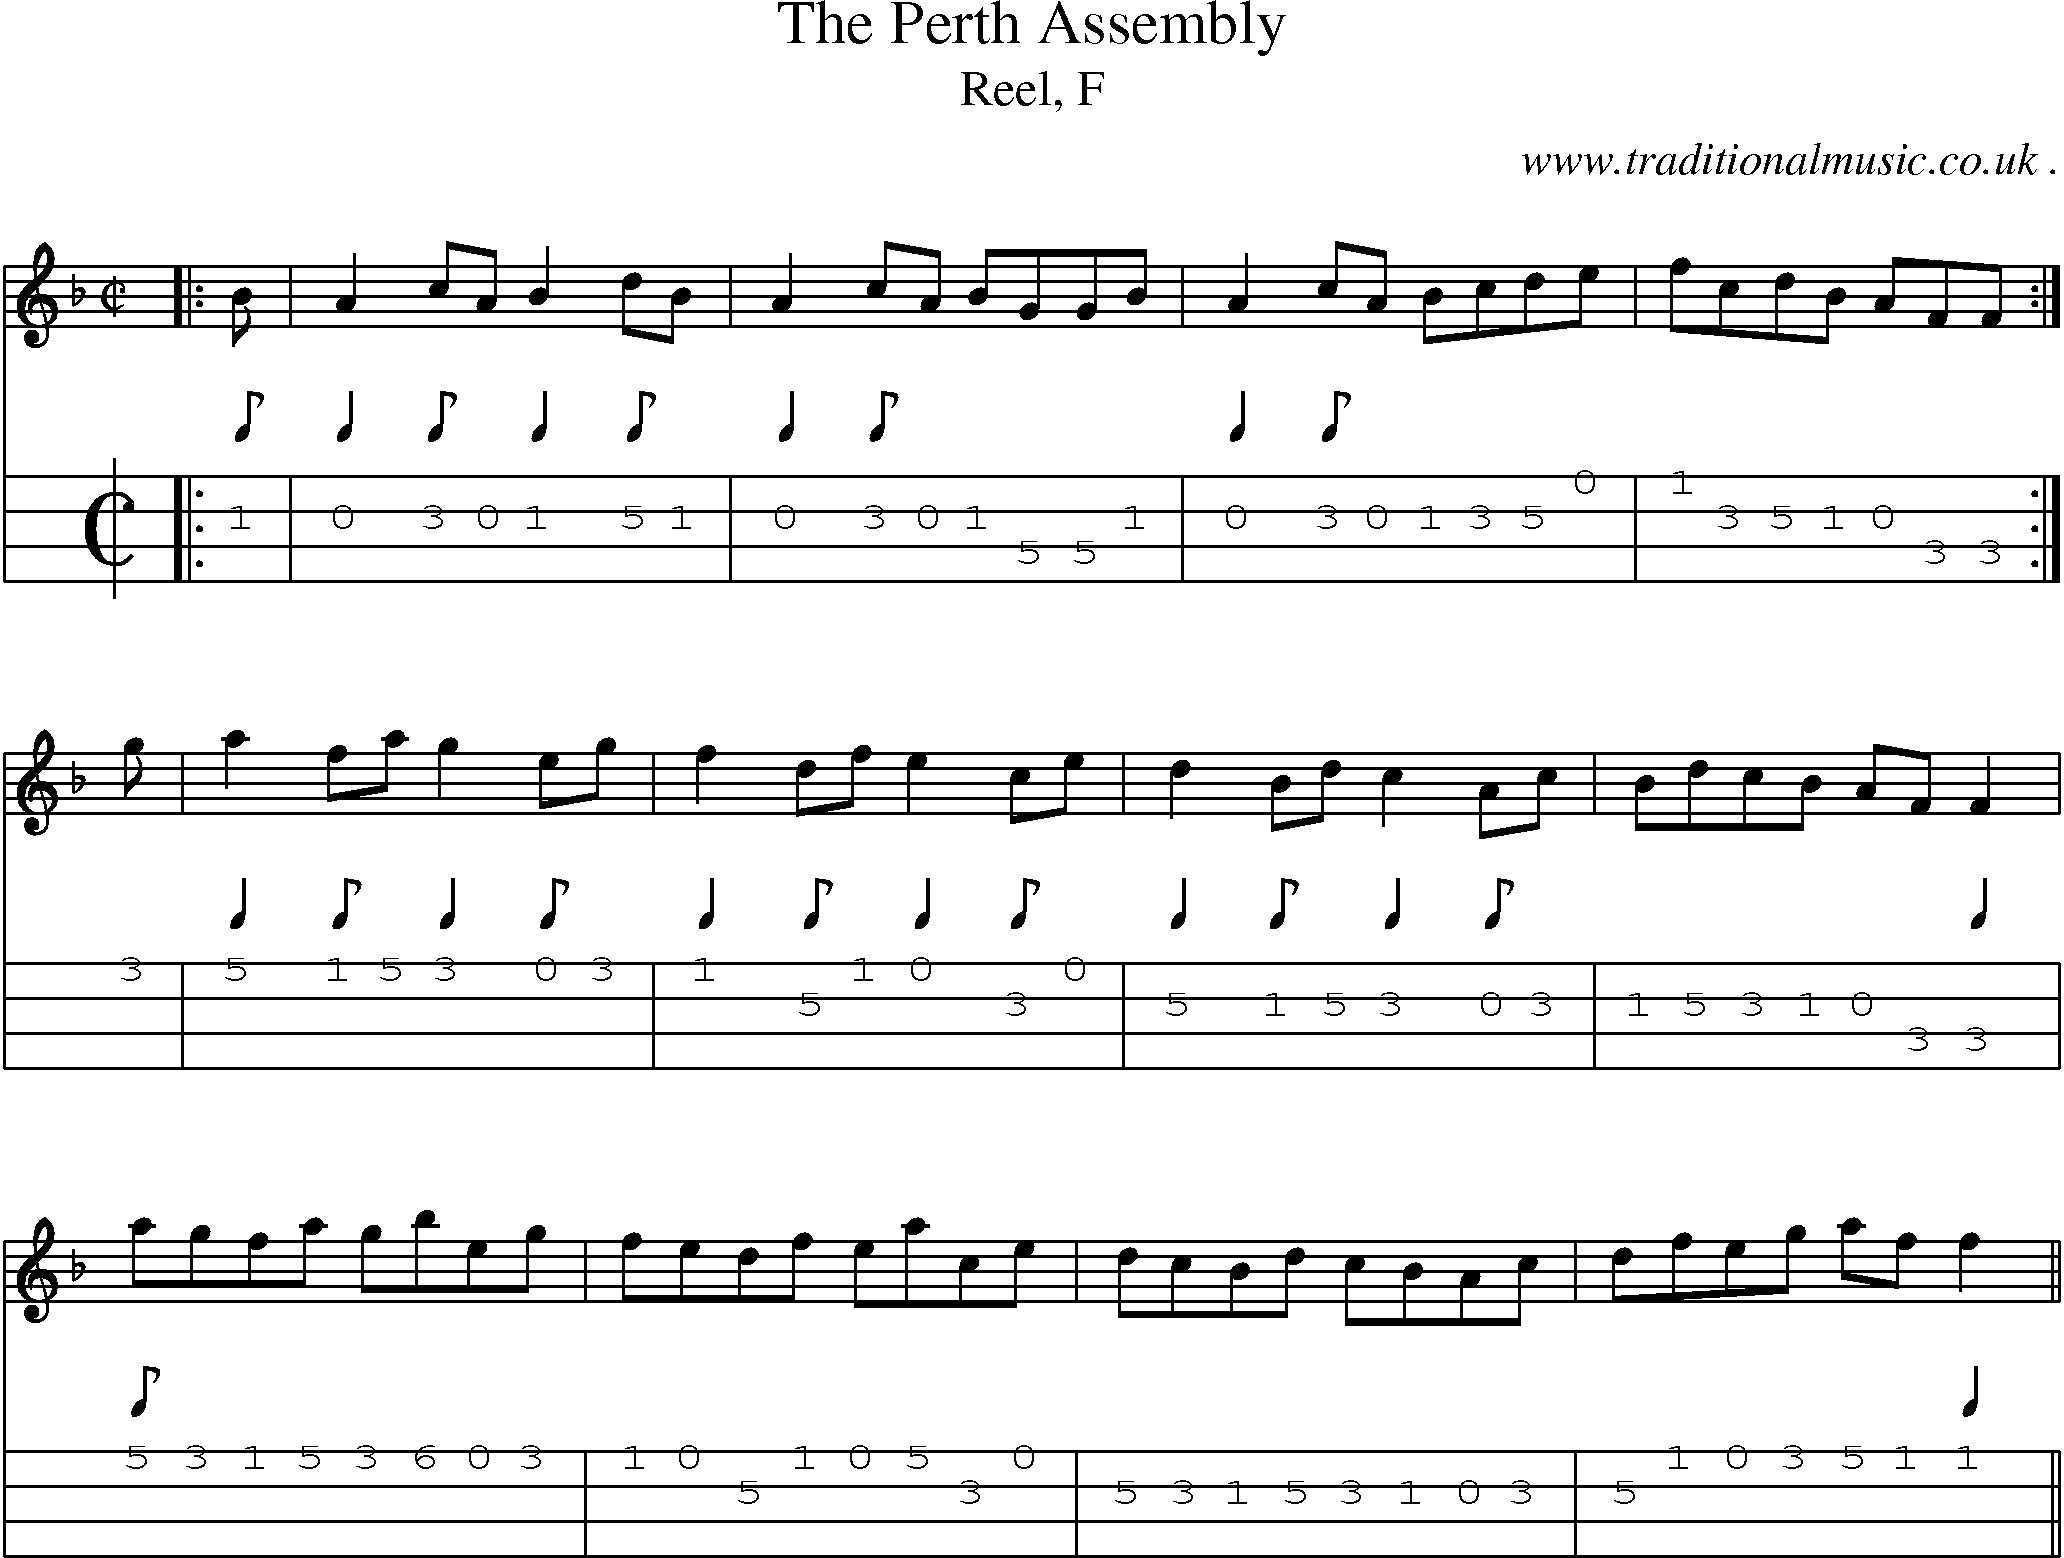 Sheet-music  score, Chords and Mandolin Tabs for The Perth Assembly